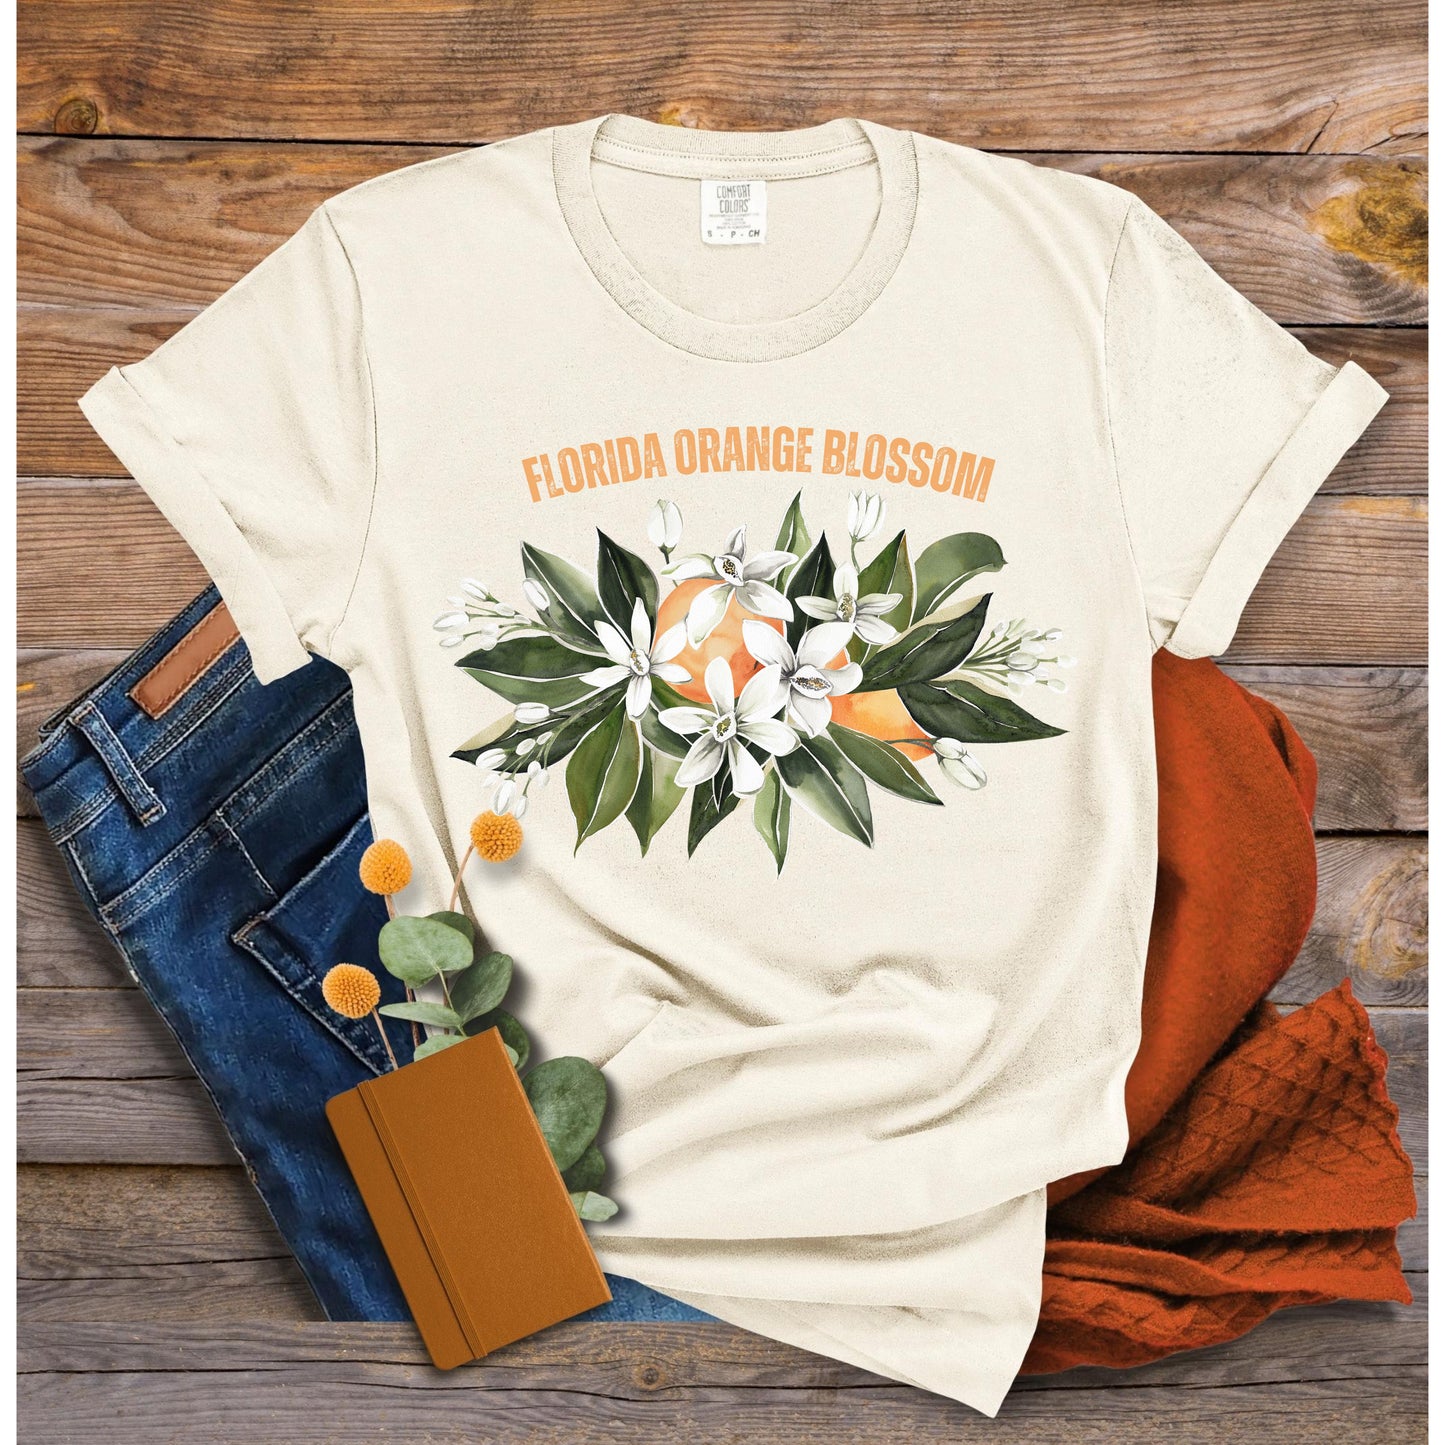 Lovely Florida Orange Blossom State Flower Garment-Dyed T-shirt, Florida Shirt, State Flower Tshirt, Gifts For Her, Gifts For Women